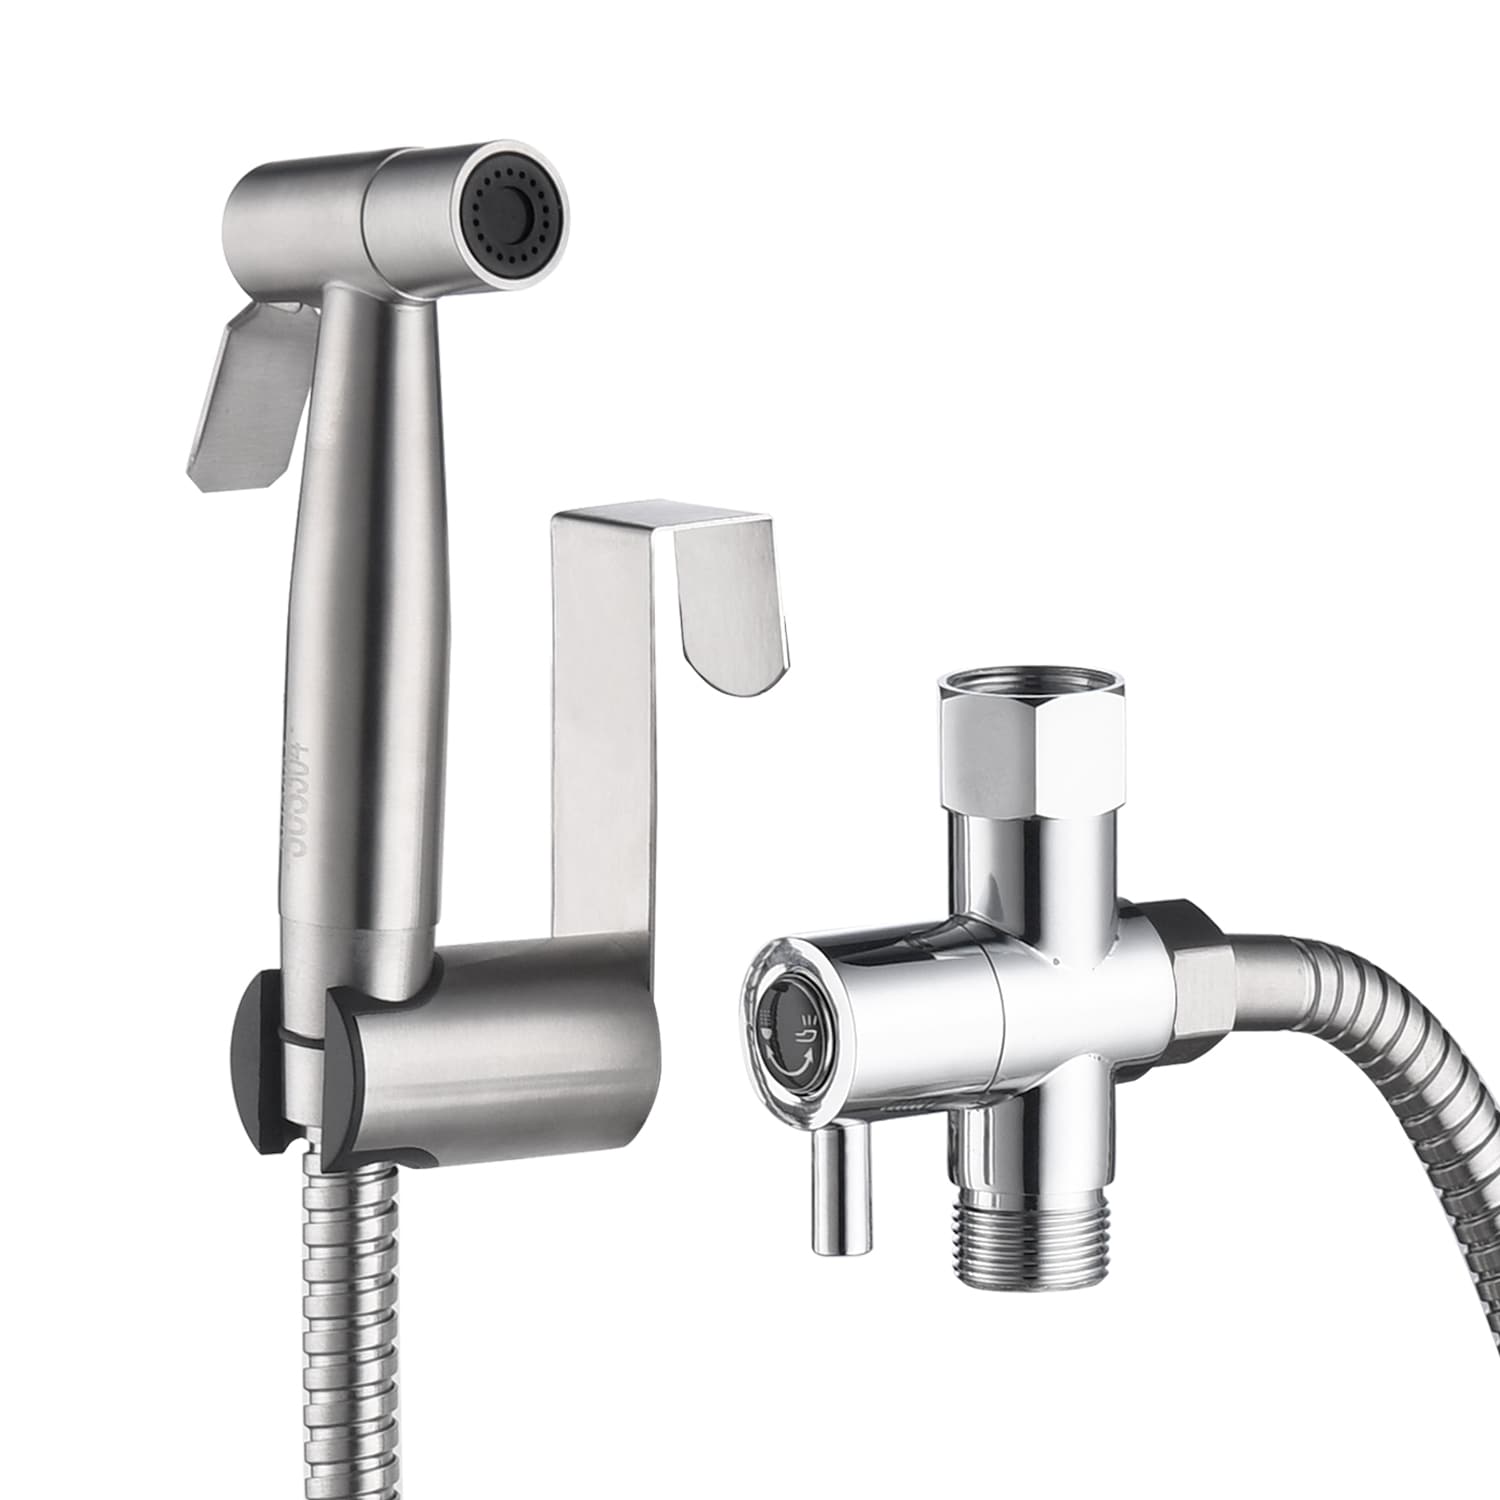 Stainless Steel Cloth Diaper Sprayer Kit By Easy Giggles - Handheld Shattaf  Bidet Spray For Toilet With Brushed Nickel Finish